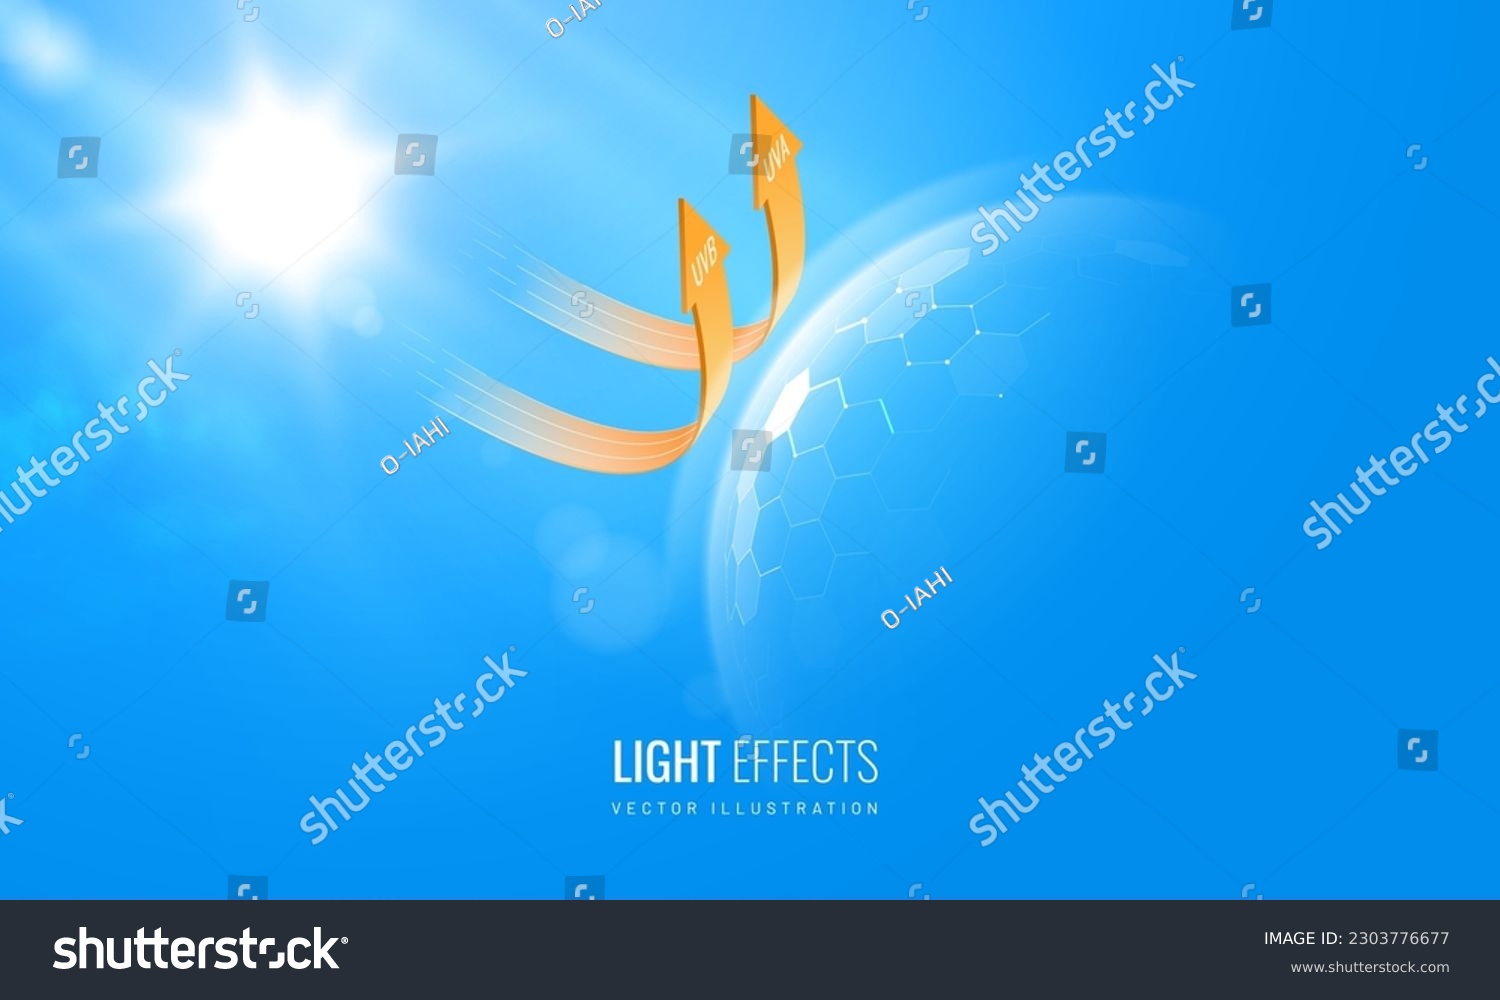 Protected shield from the sun's rays - background for product. Force field prevents the penetration of sunlight. Degrees of protection against UV rays. Vector illustration #2303776677